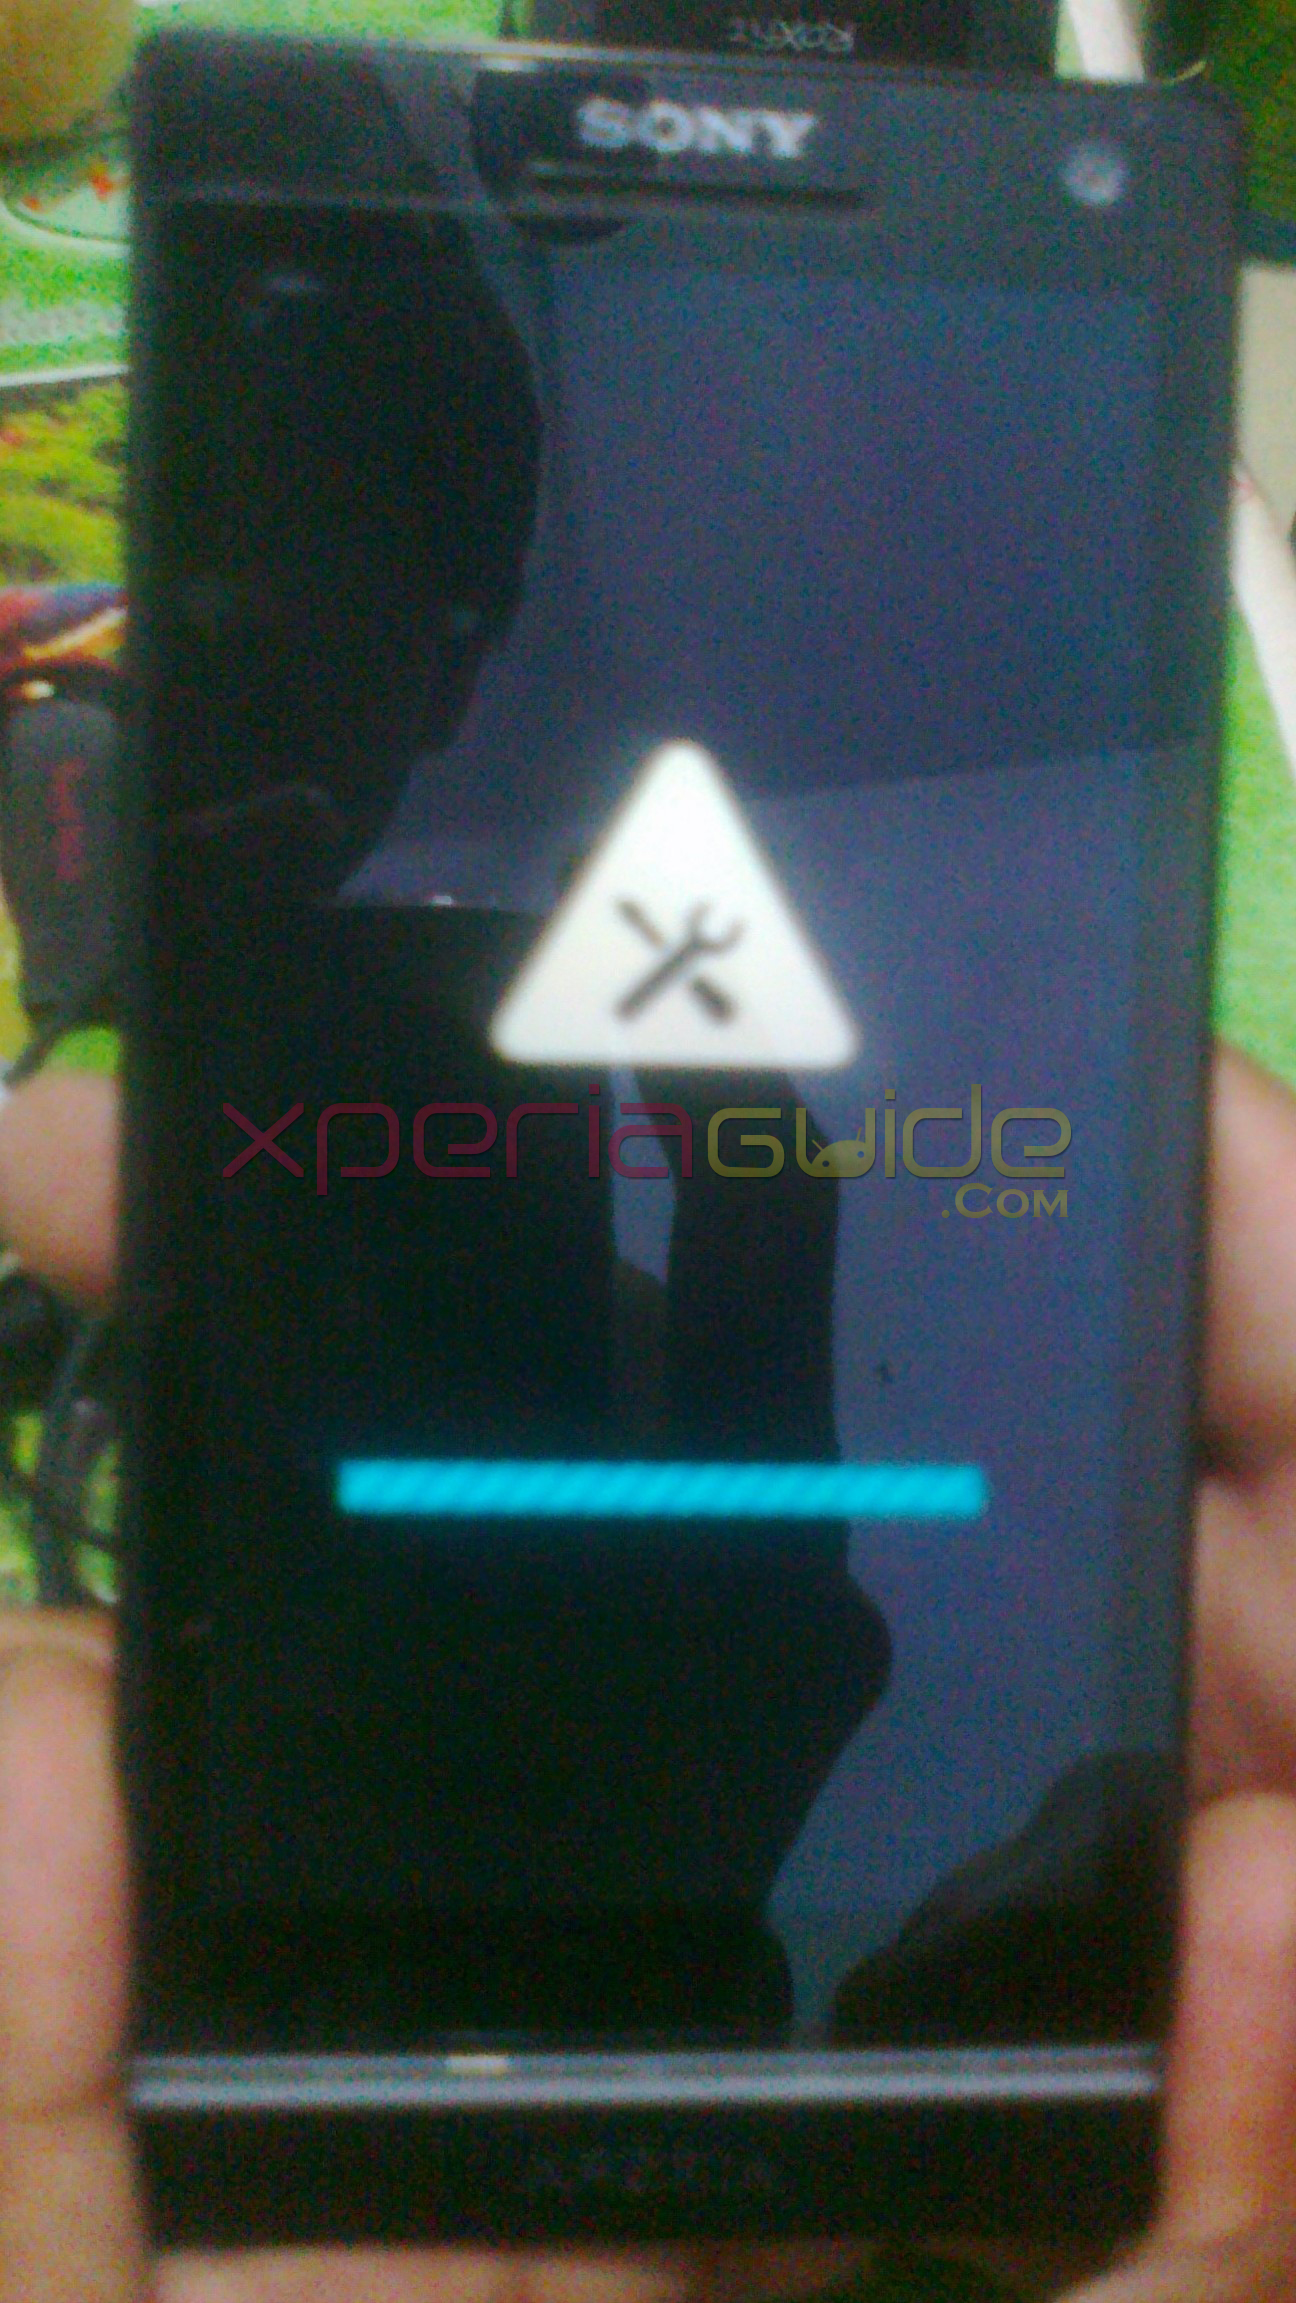 Error in Xperia S LT26i jelly bean 6.2.B.0.200 firmware while booting up